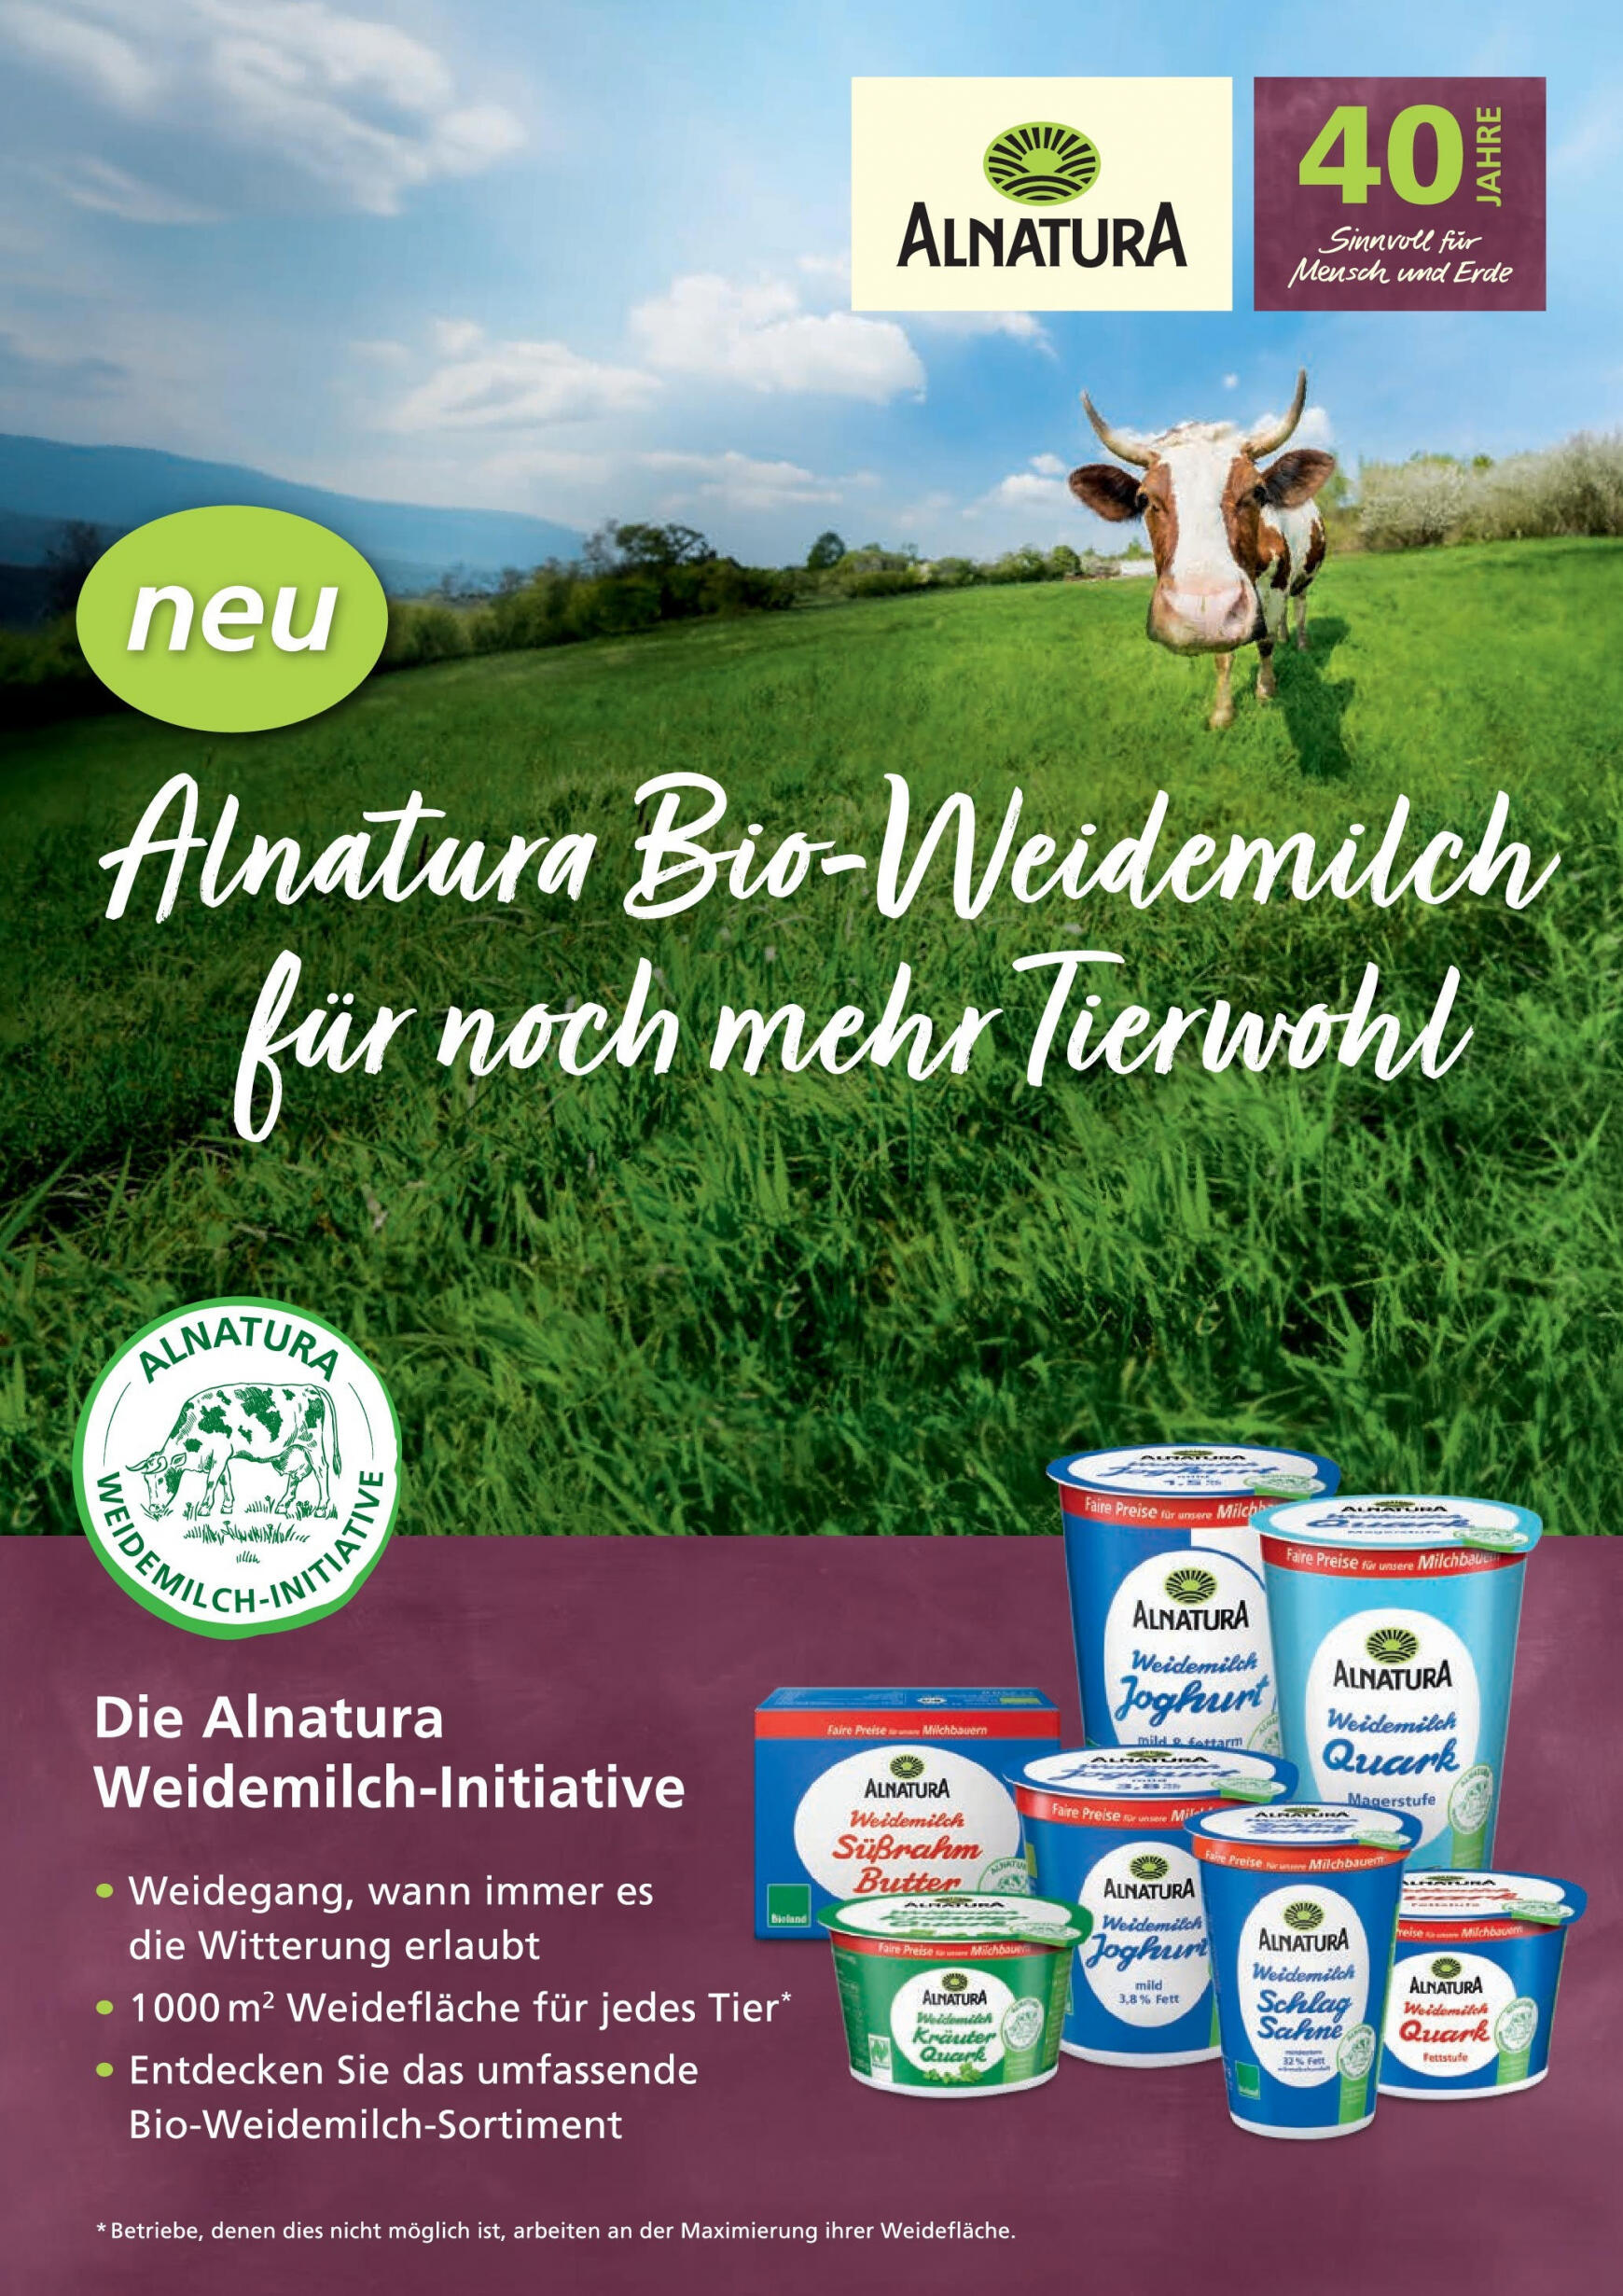 famila-nordwest - Flyer Famila Nordwest - Alnatura Bio-Weidemilch aktuell 01.06. - 30.06. - page: 1